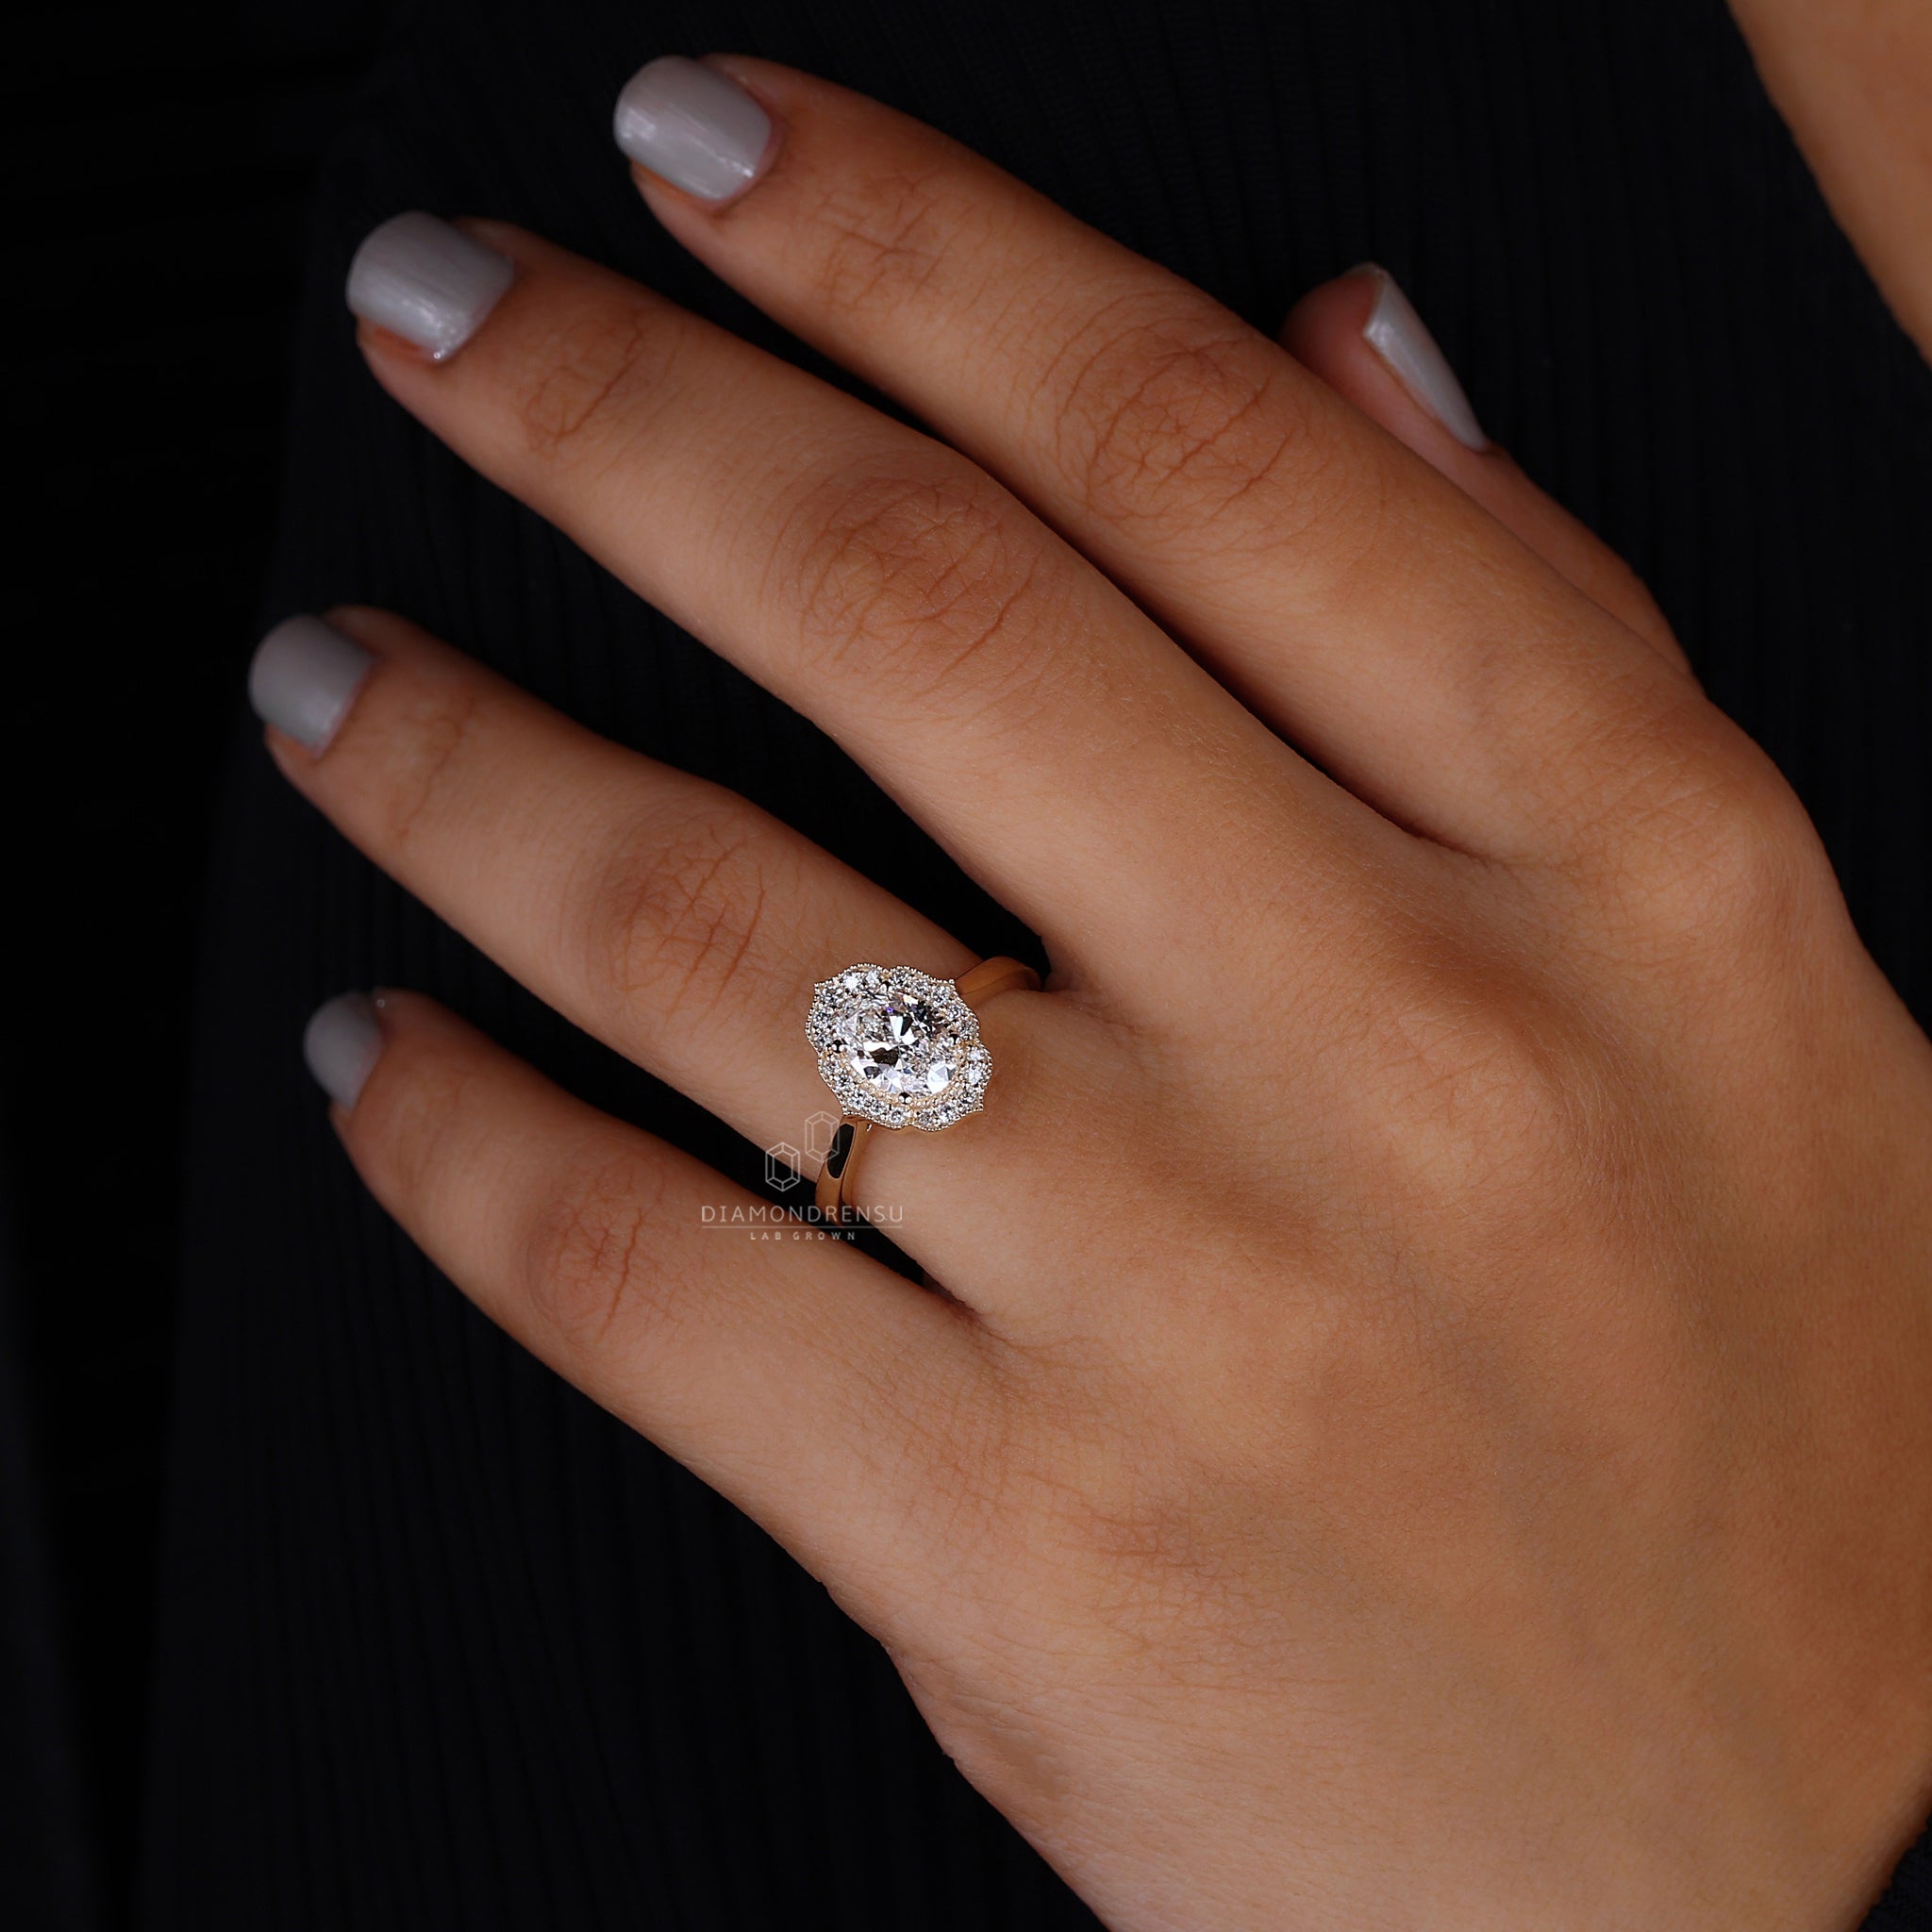 Close view of a model’s hand featuring an oval diamond ring, accentuating the stone's brilliance.